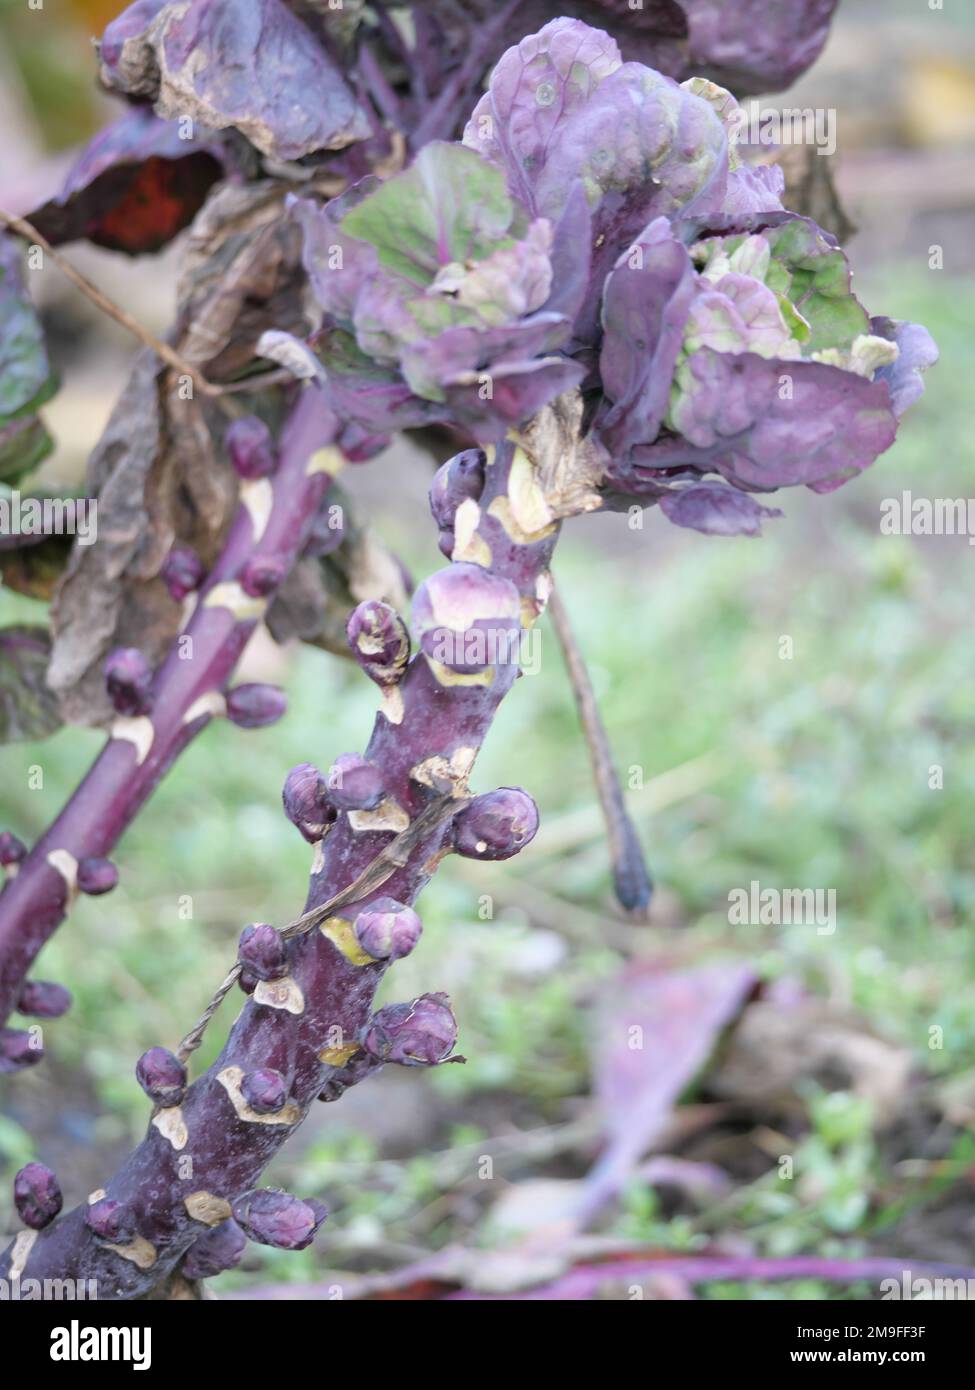 Detail of florets of a Brussels sprout as a winter vegetable in the kitchen garden for harvesting Stock Photo